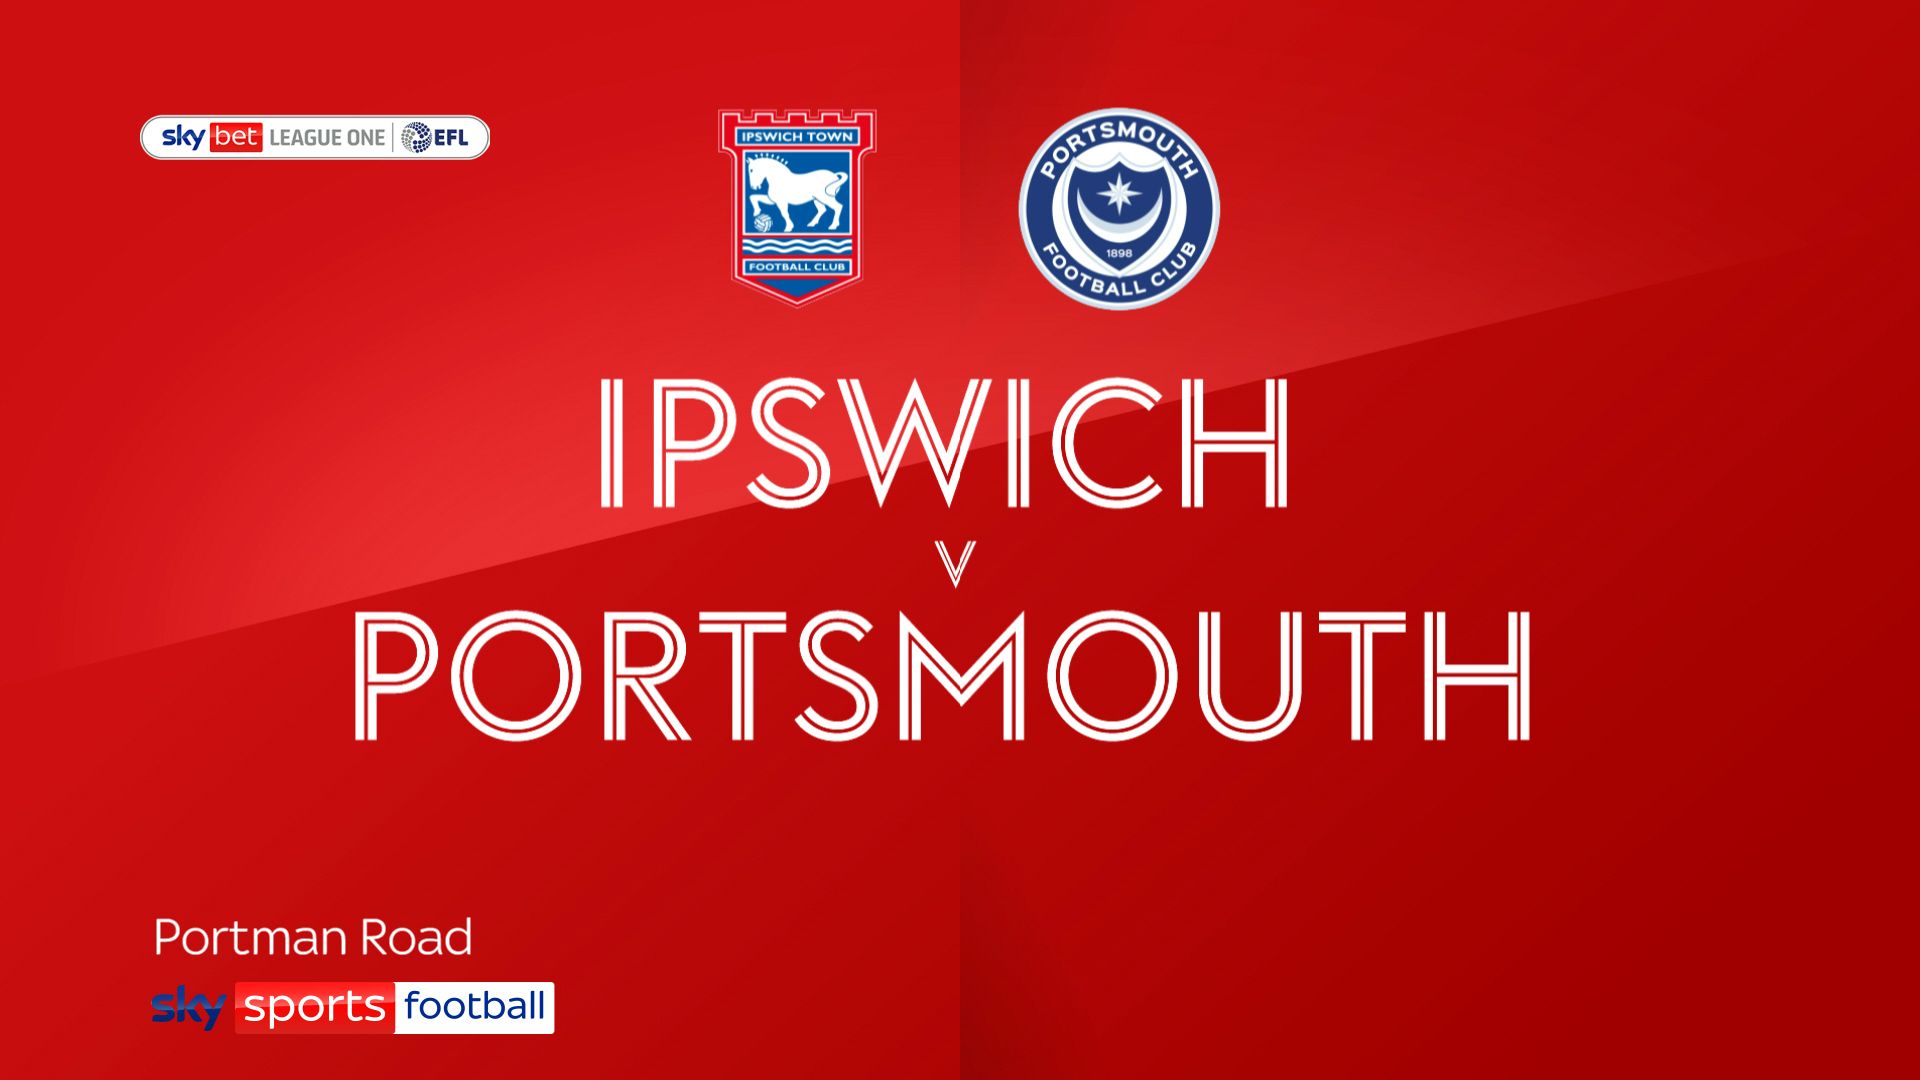 Ipswich and Portsmouth unable to find breakthrough